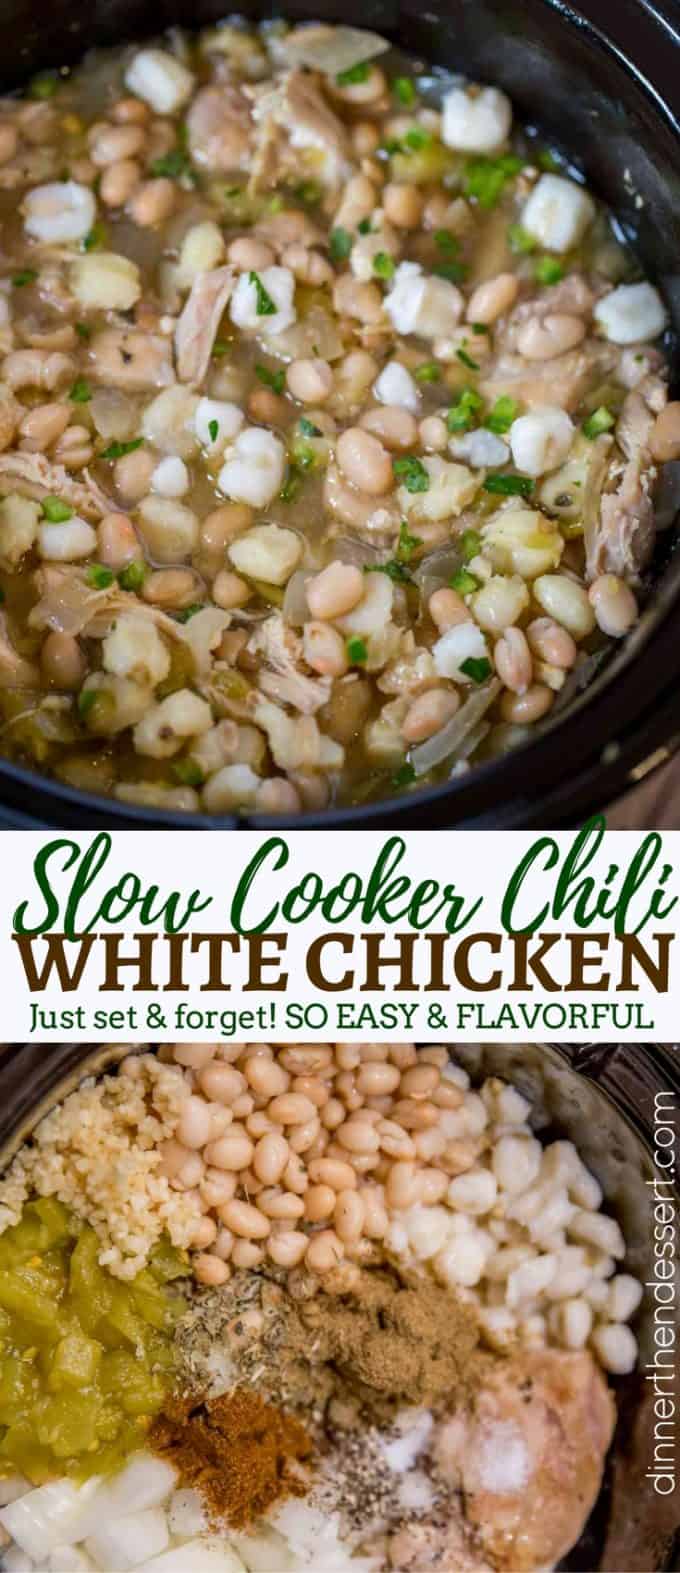 Slow Cooker White Chicken Chili with hominy, white beans, chicken and peppers is the perfect, easy white chicken chili of your dreams.